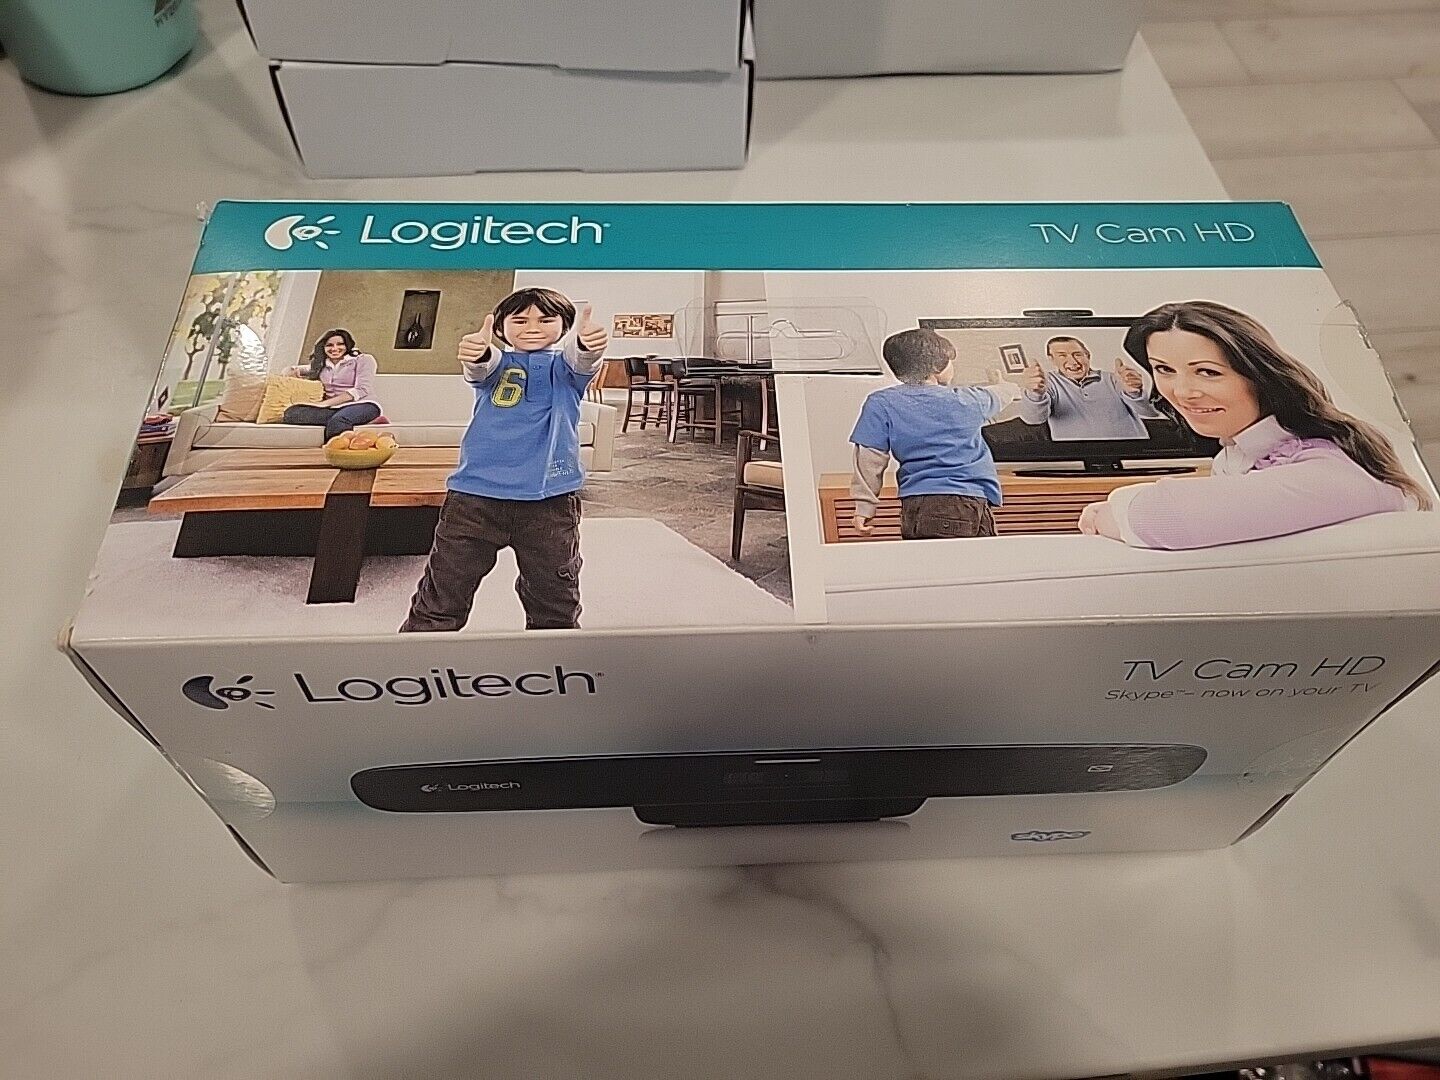 NEW - Logitech TV Cam HD Web Cam w/ Power Adapter, Remote Control and HDMI Cable